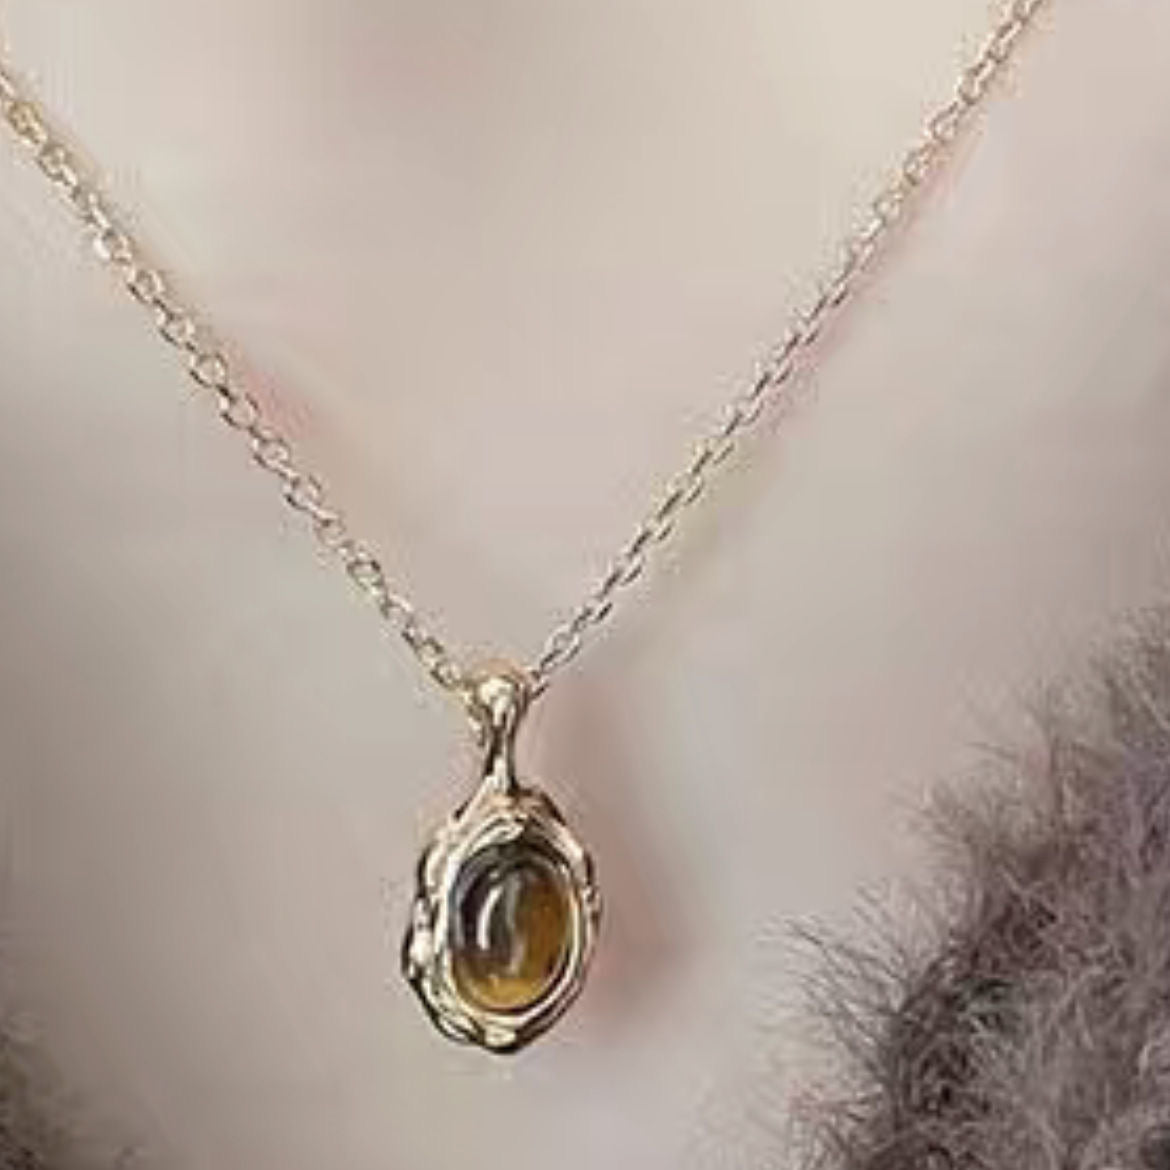 [Earth] Tiger Eye Gemstone Pendant Necklace - Natural Stone, Wealth Attraction